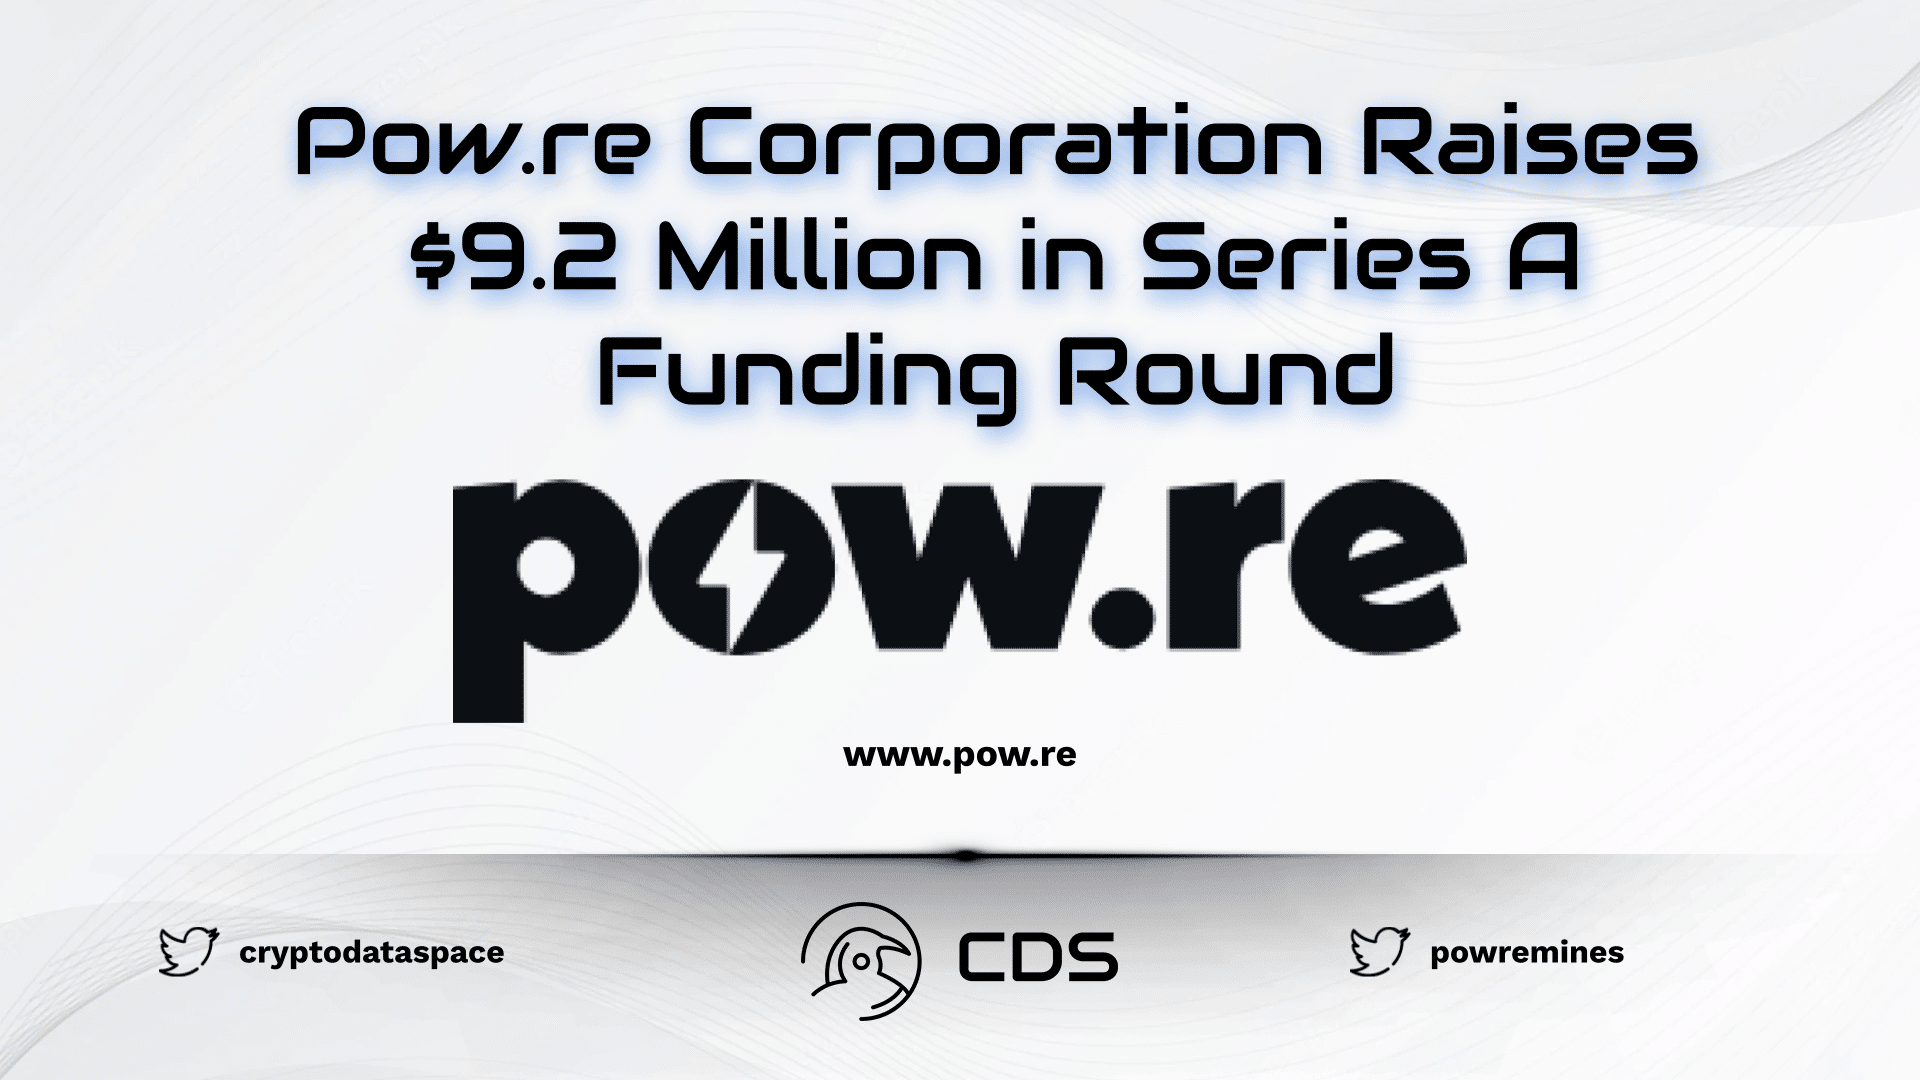 Pow.re Corporation Raises $9.2 Million in Series A Funding Round